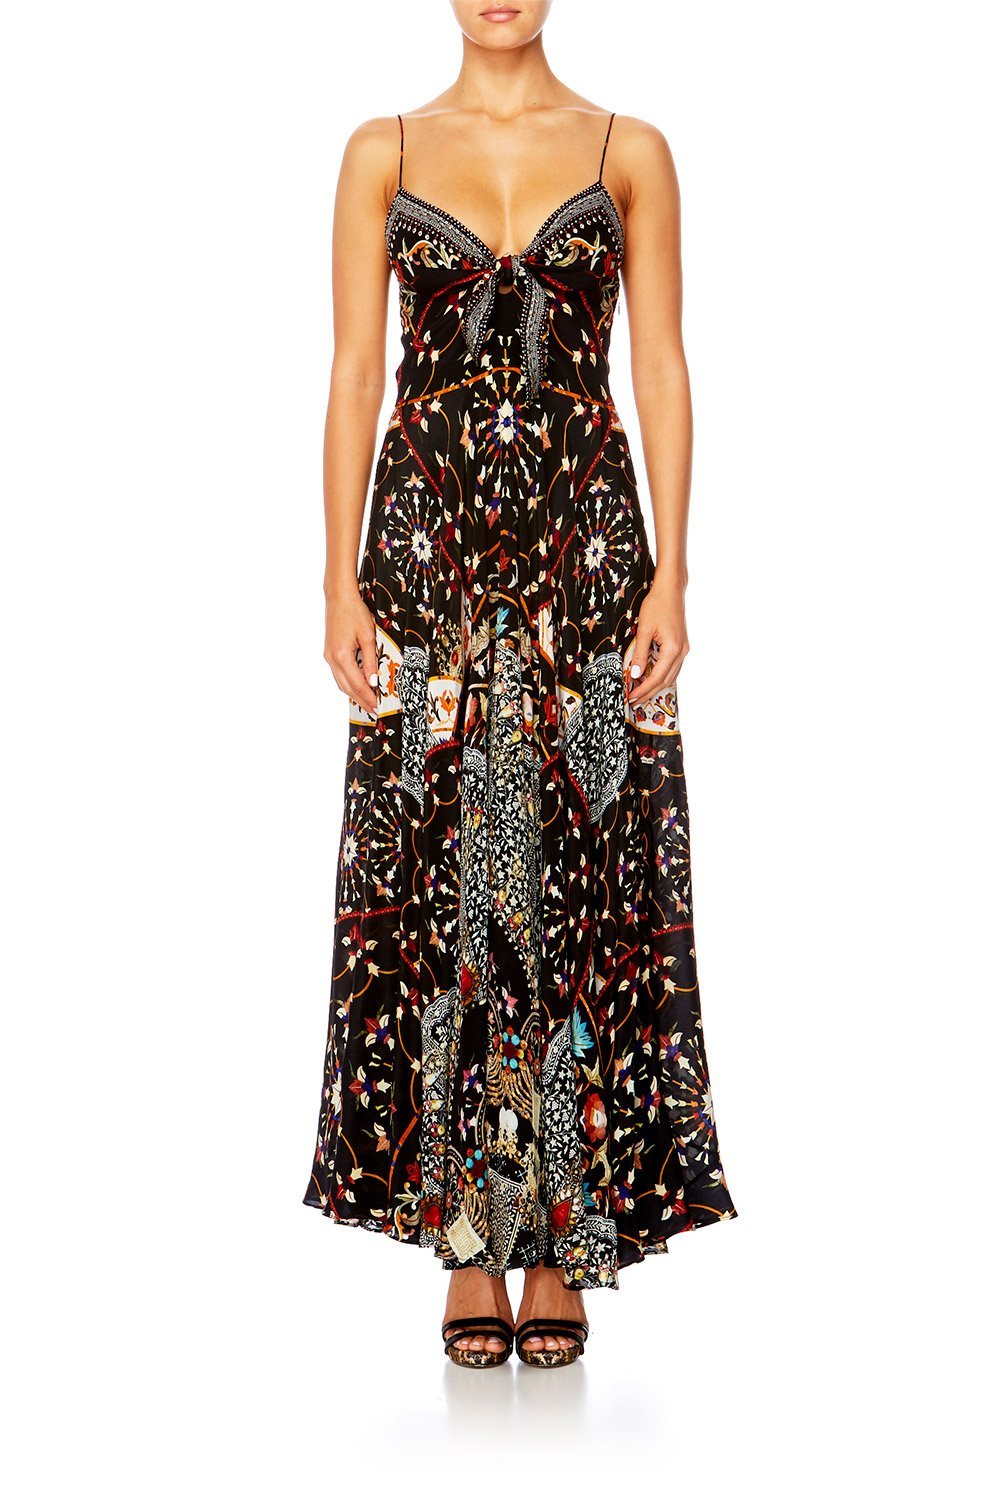 CHAMBER OF REFLECTIONS LONG DRESS W TIE FRONT